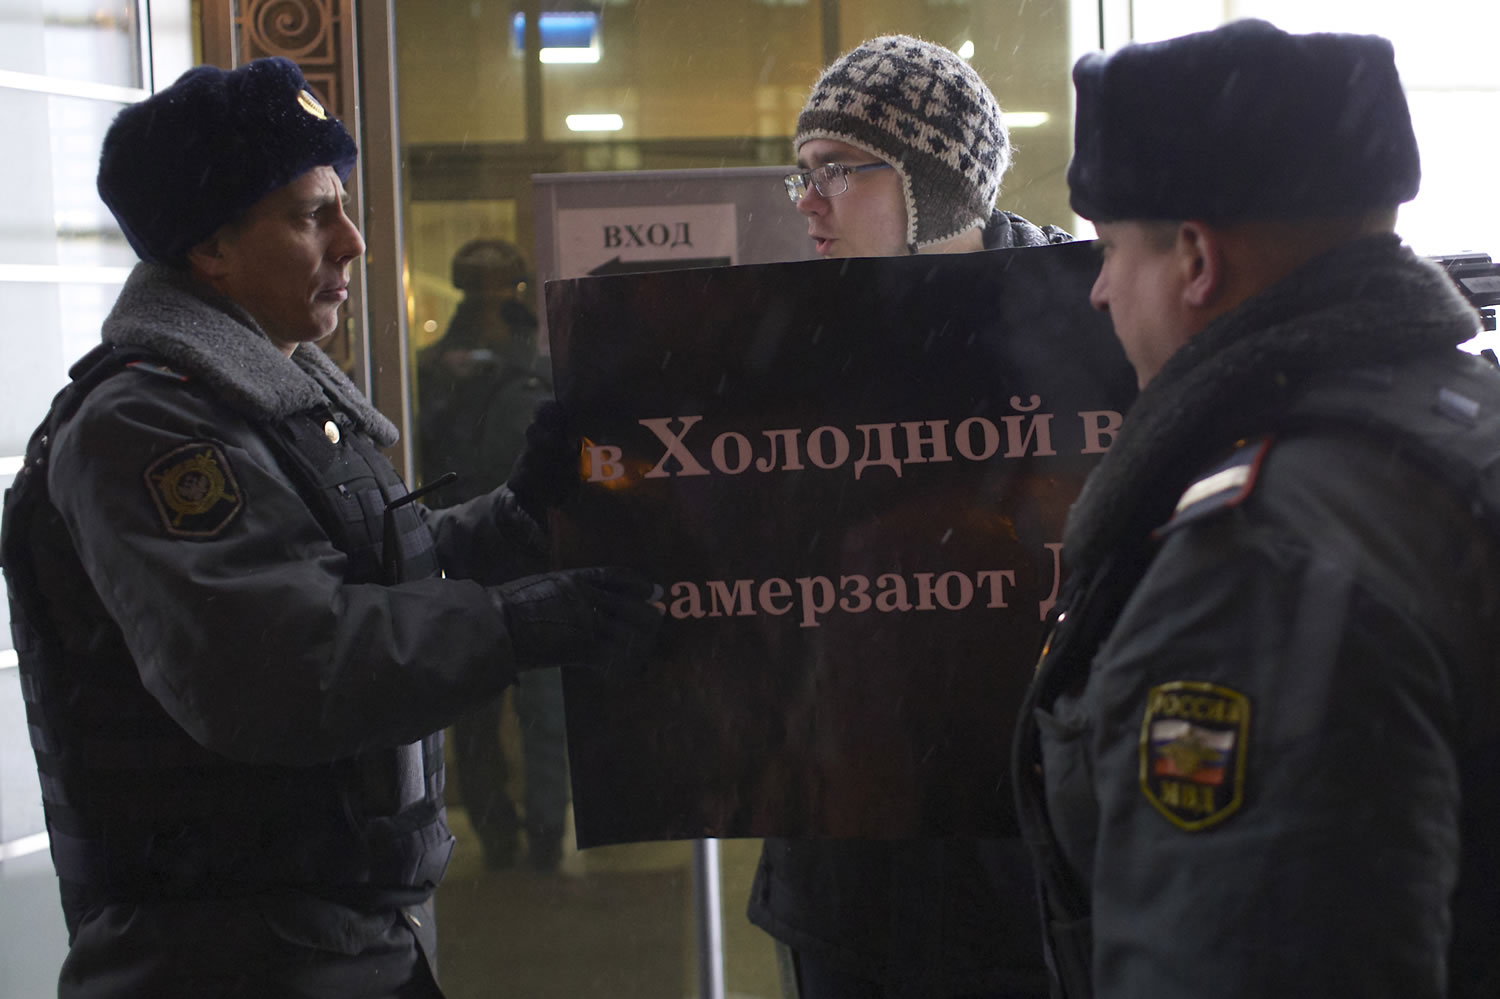 A protester argues with police officers outside the Federation Council on Wednesday. Several protesters were detained Wednesday morning outside the upper chamber of Russia's parliament as it prepared to vote on a controversial measure banning Americans from adopting Russian children.